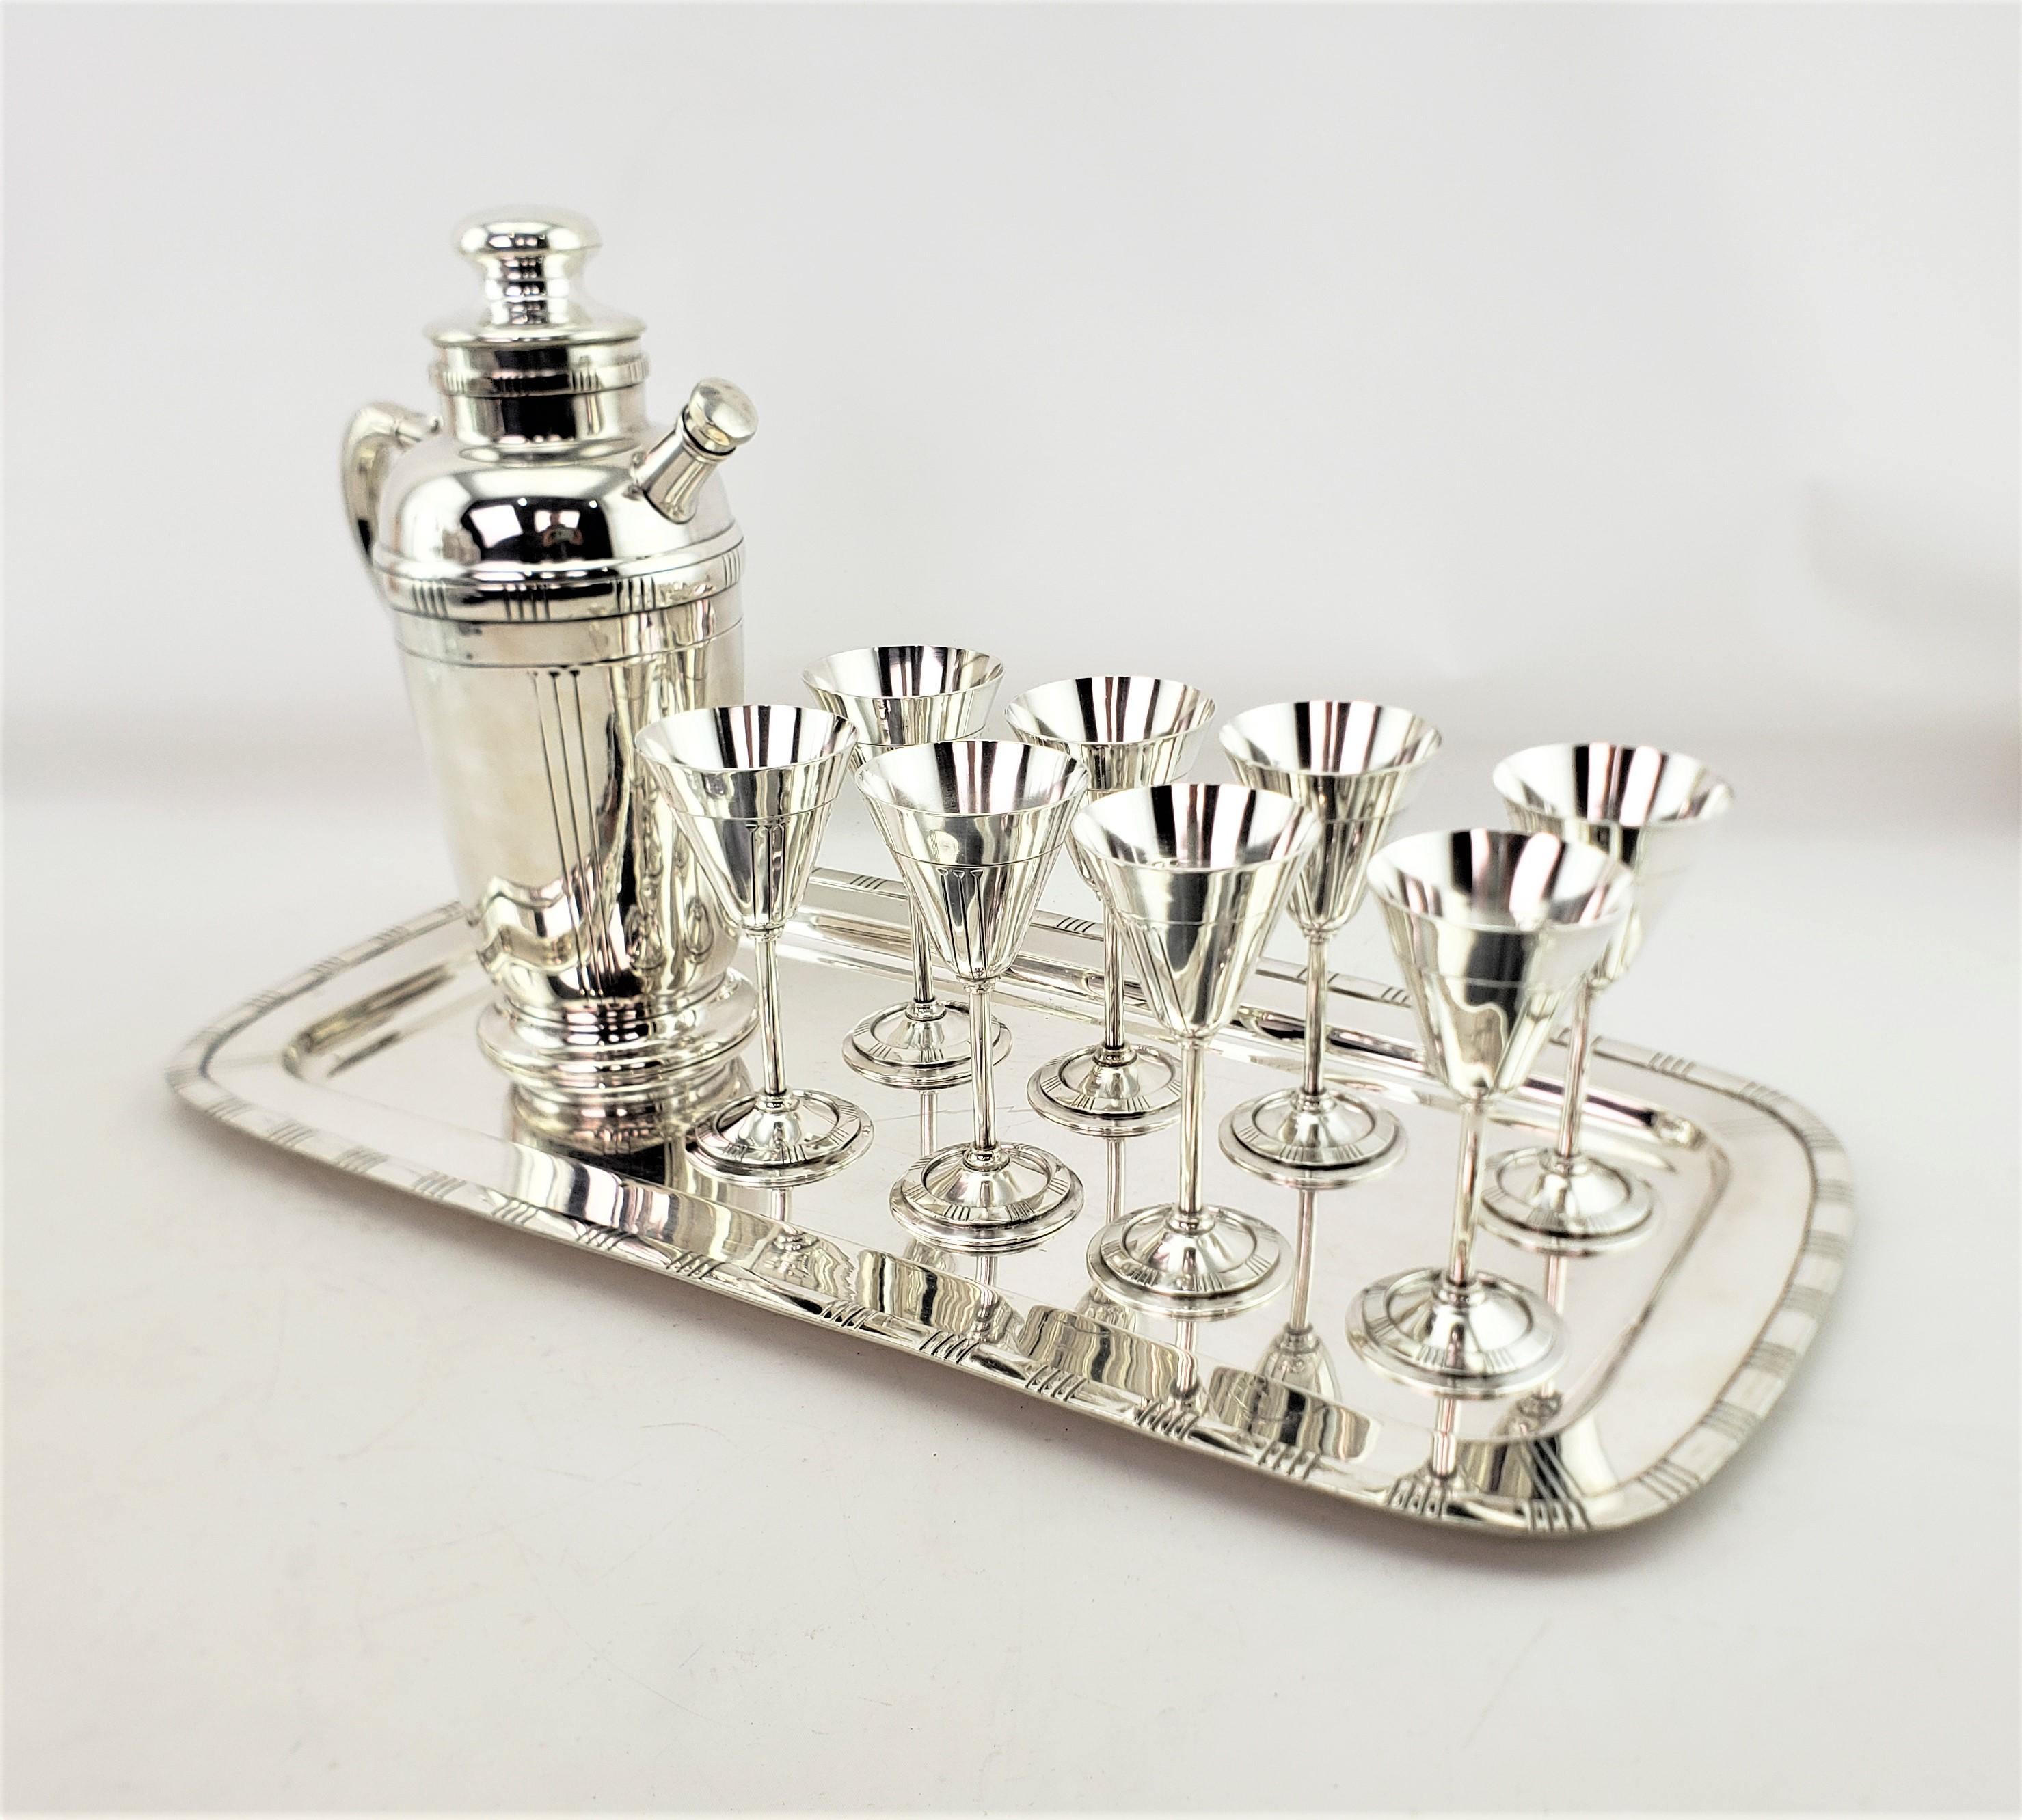 20th Century Midcentury Silver Plated Cocktail Set with Tray, Glasses & Shaker Pitcher For Sale